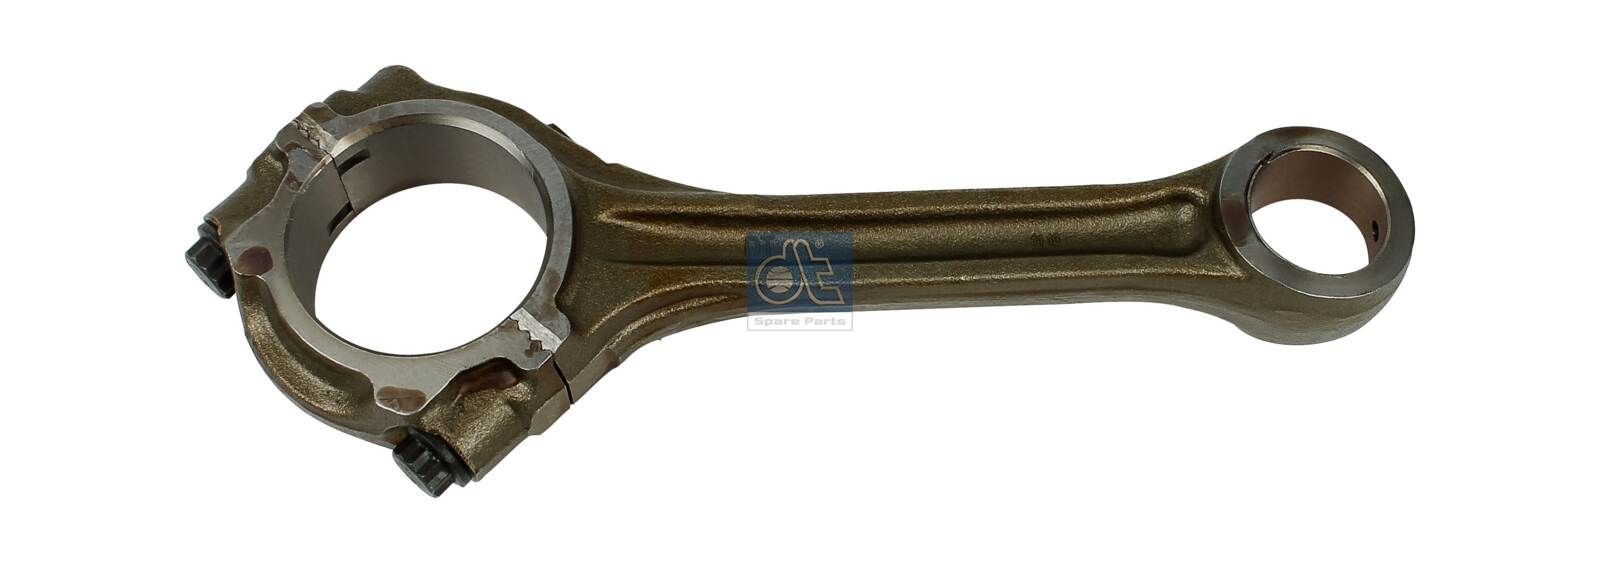 DT Spare Parts 4.61113 Connecting Rod A 376 030 73 20